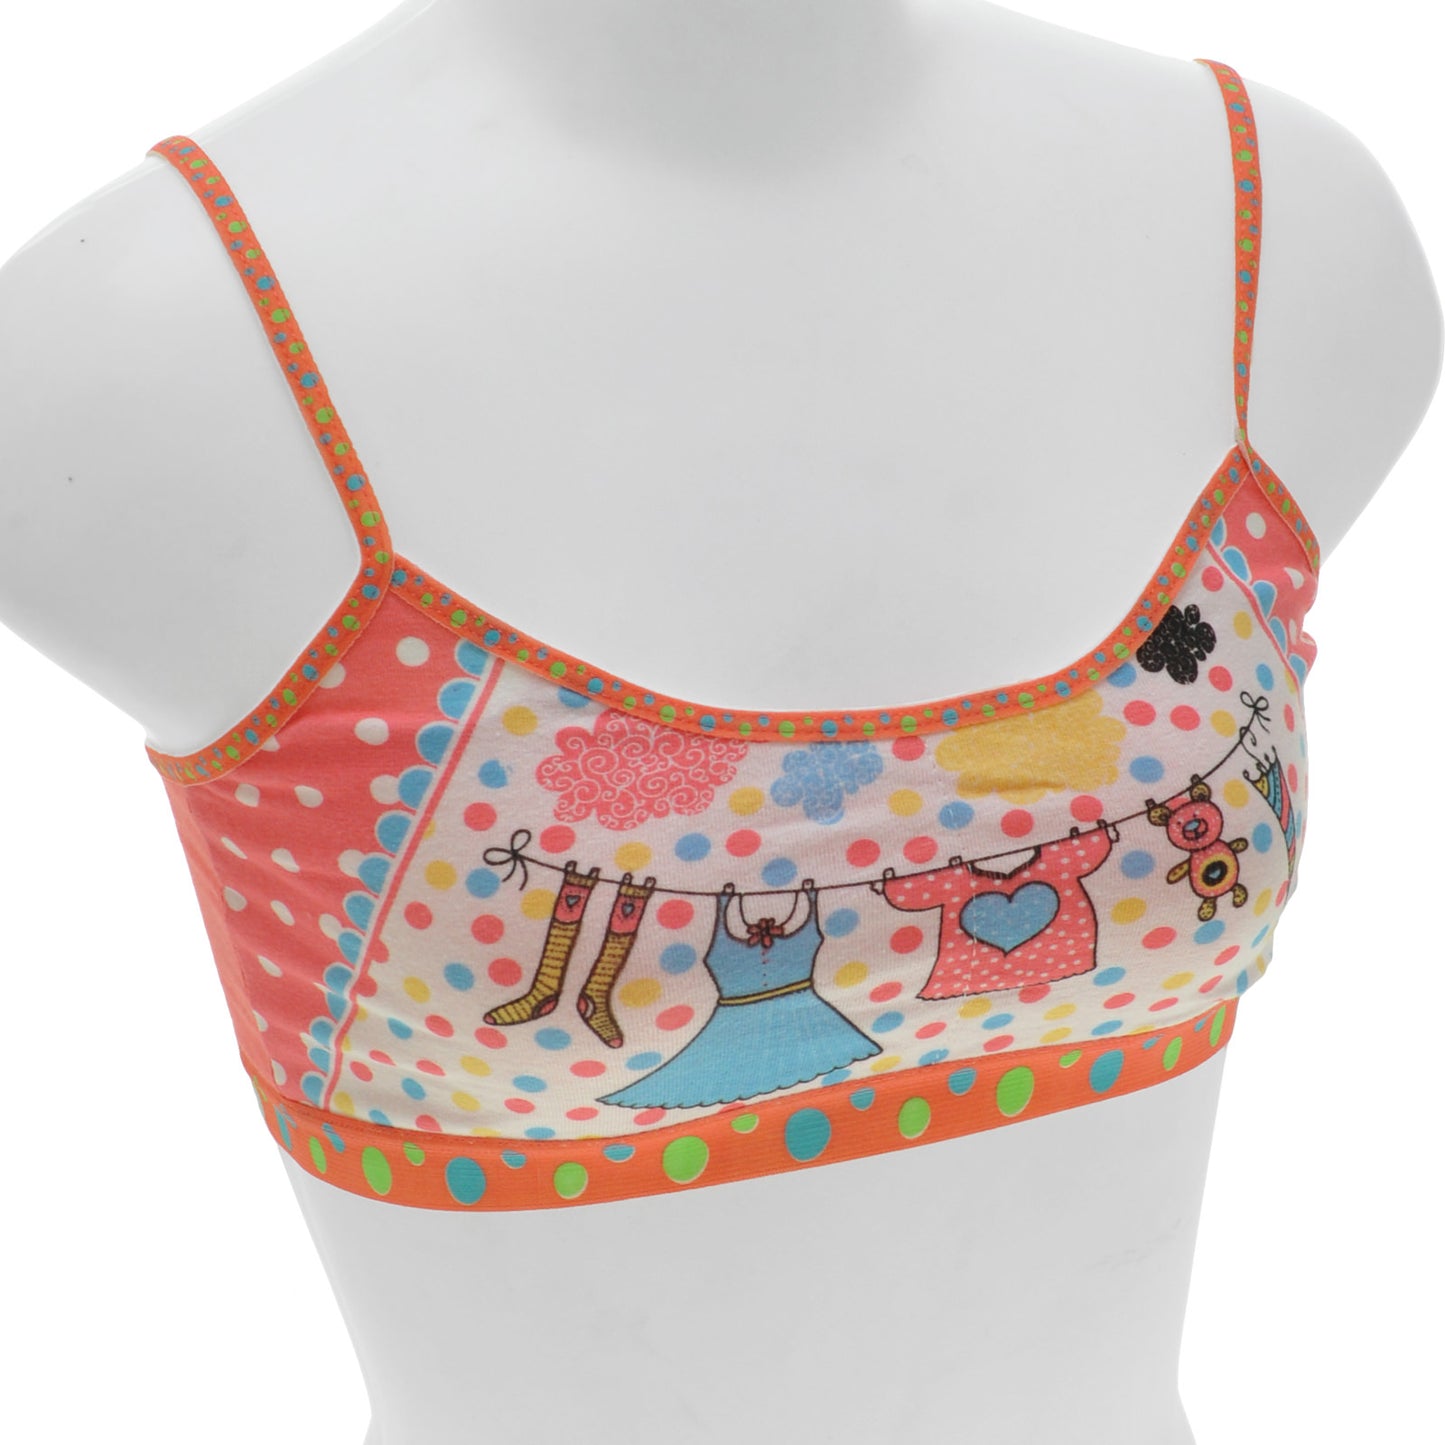 Girls' Cotton Cami Style Training Bras with Fashion Print (6-Pack)